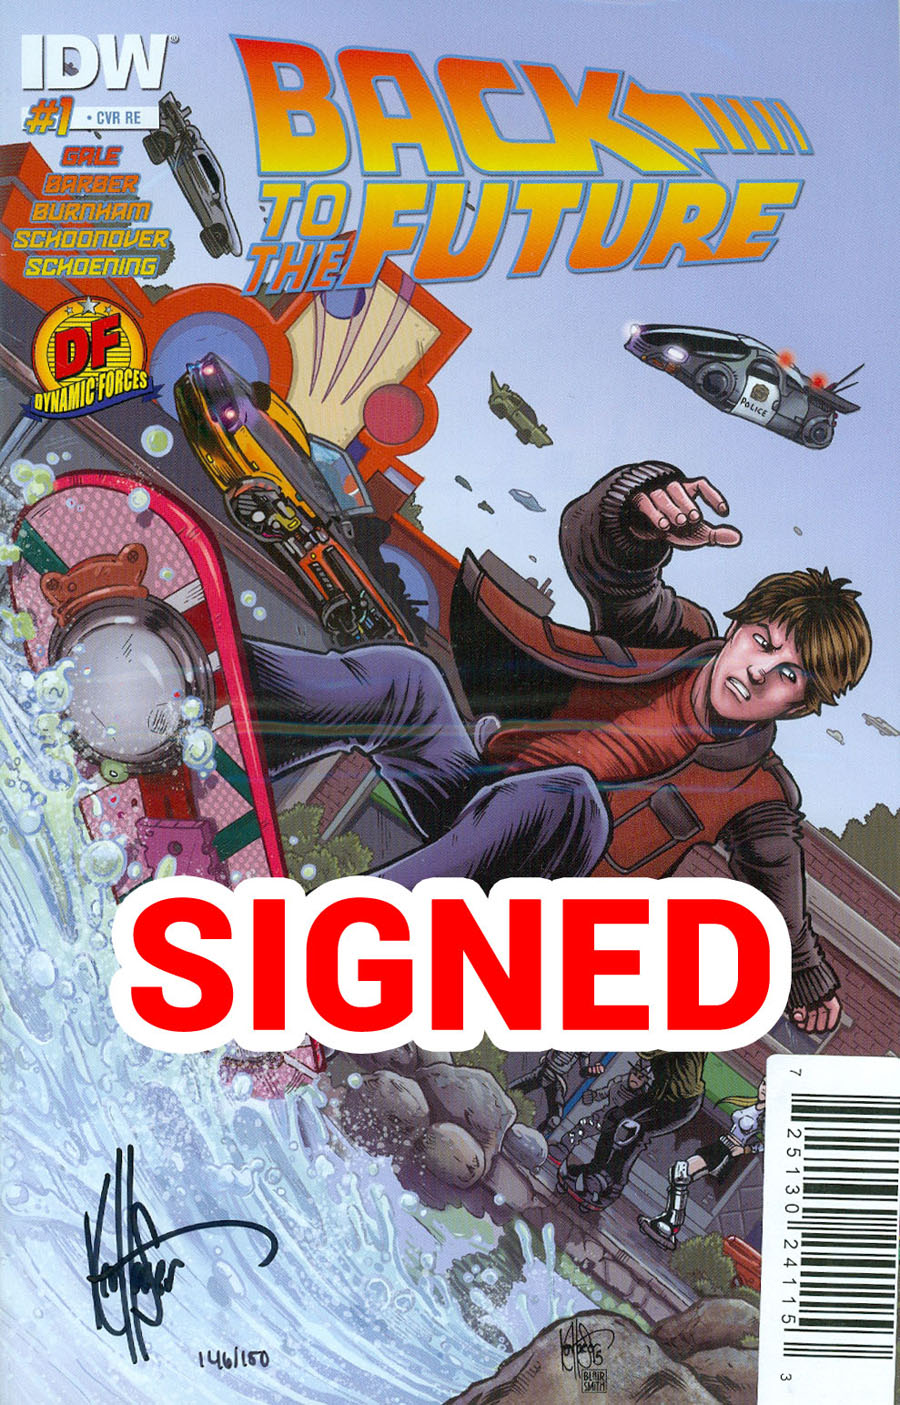 Back To The Future Vol 2 #1 Cover G DF Exclusive Ken Haeser Variant Cover Signed By Ken Haeser